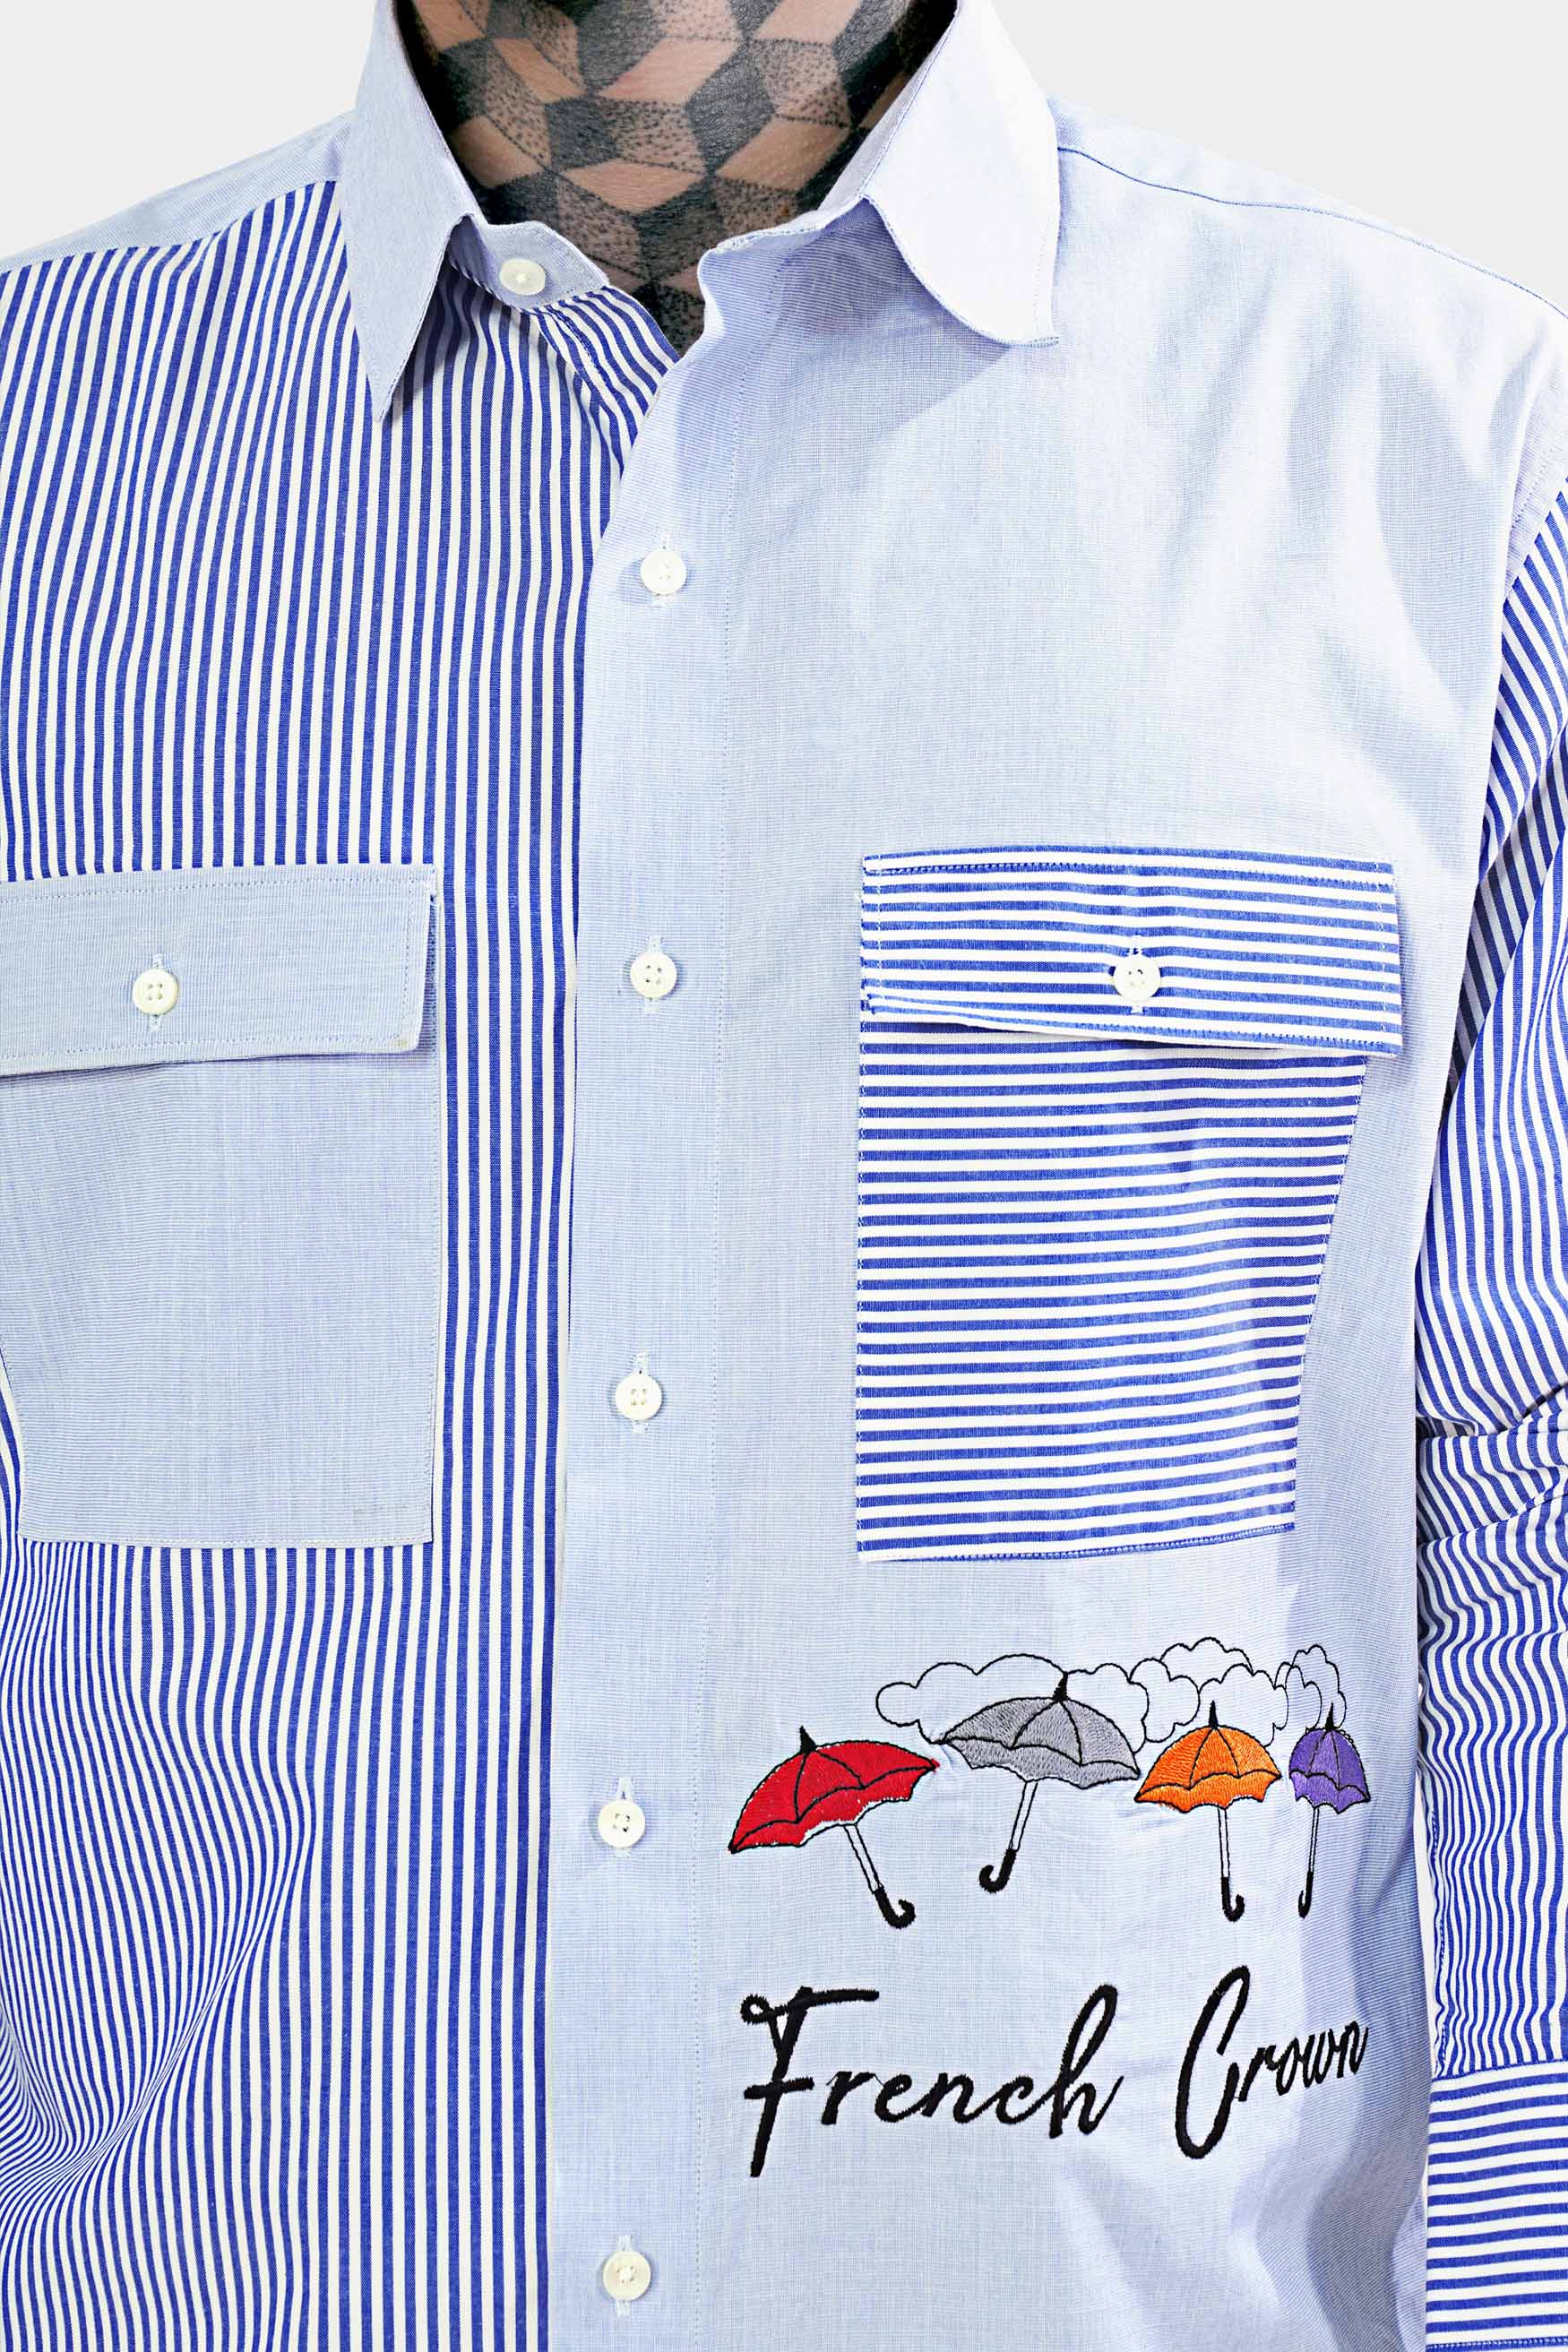 Hawkes Gray and Perano Blue Striped with Brand Name Embroidered Premium Cotton Designer Shirt 8267-P147-E276-38, 8267-P147-E276-H-38, 8267-P147-E276-39, 8267-P147-E276-H-39, 8267-P147-E276-40, 8267-P147-E276-H-40, 8267-P147-E276-42, 8267-P147-E276-H-42, 8267-P147-E276-44, 8267-P147-E276-H-44, 8267-P147-E276-46, 8267-P147-E276-H-46, 8267-P147-E276-48, 8267-P147-E276-H-48, 8267-P147-E276-50, 8267-P147-E276-H-50, 8267-P147-E276-52, 8267-P147-E276-H-52